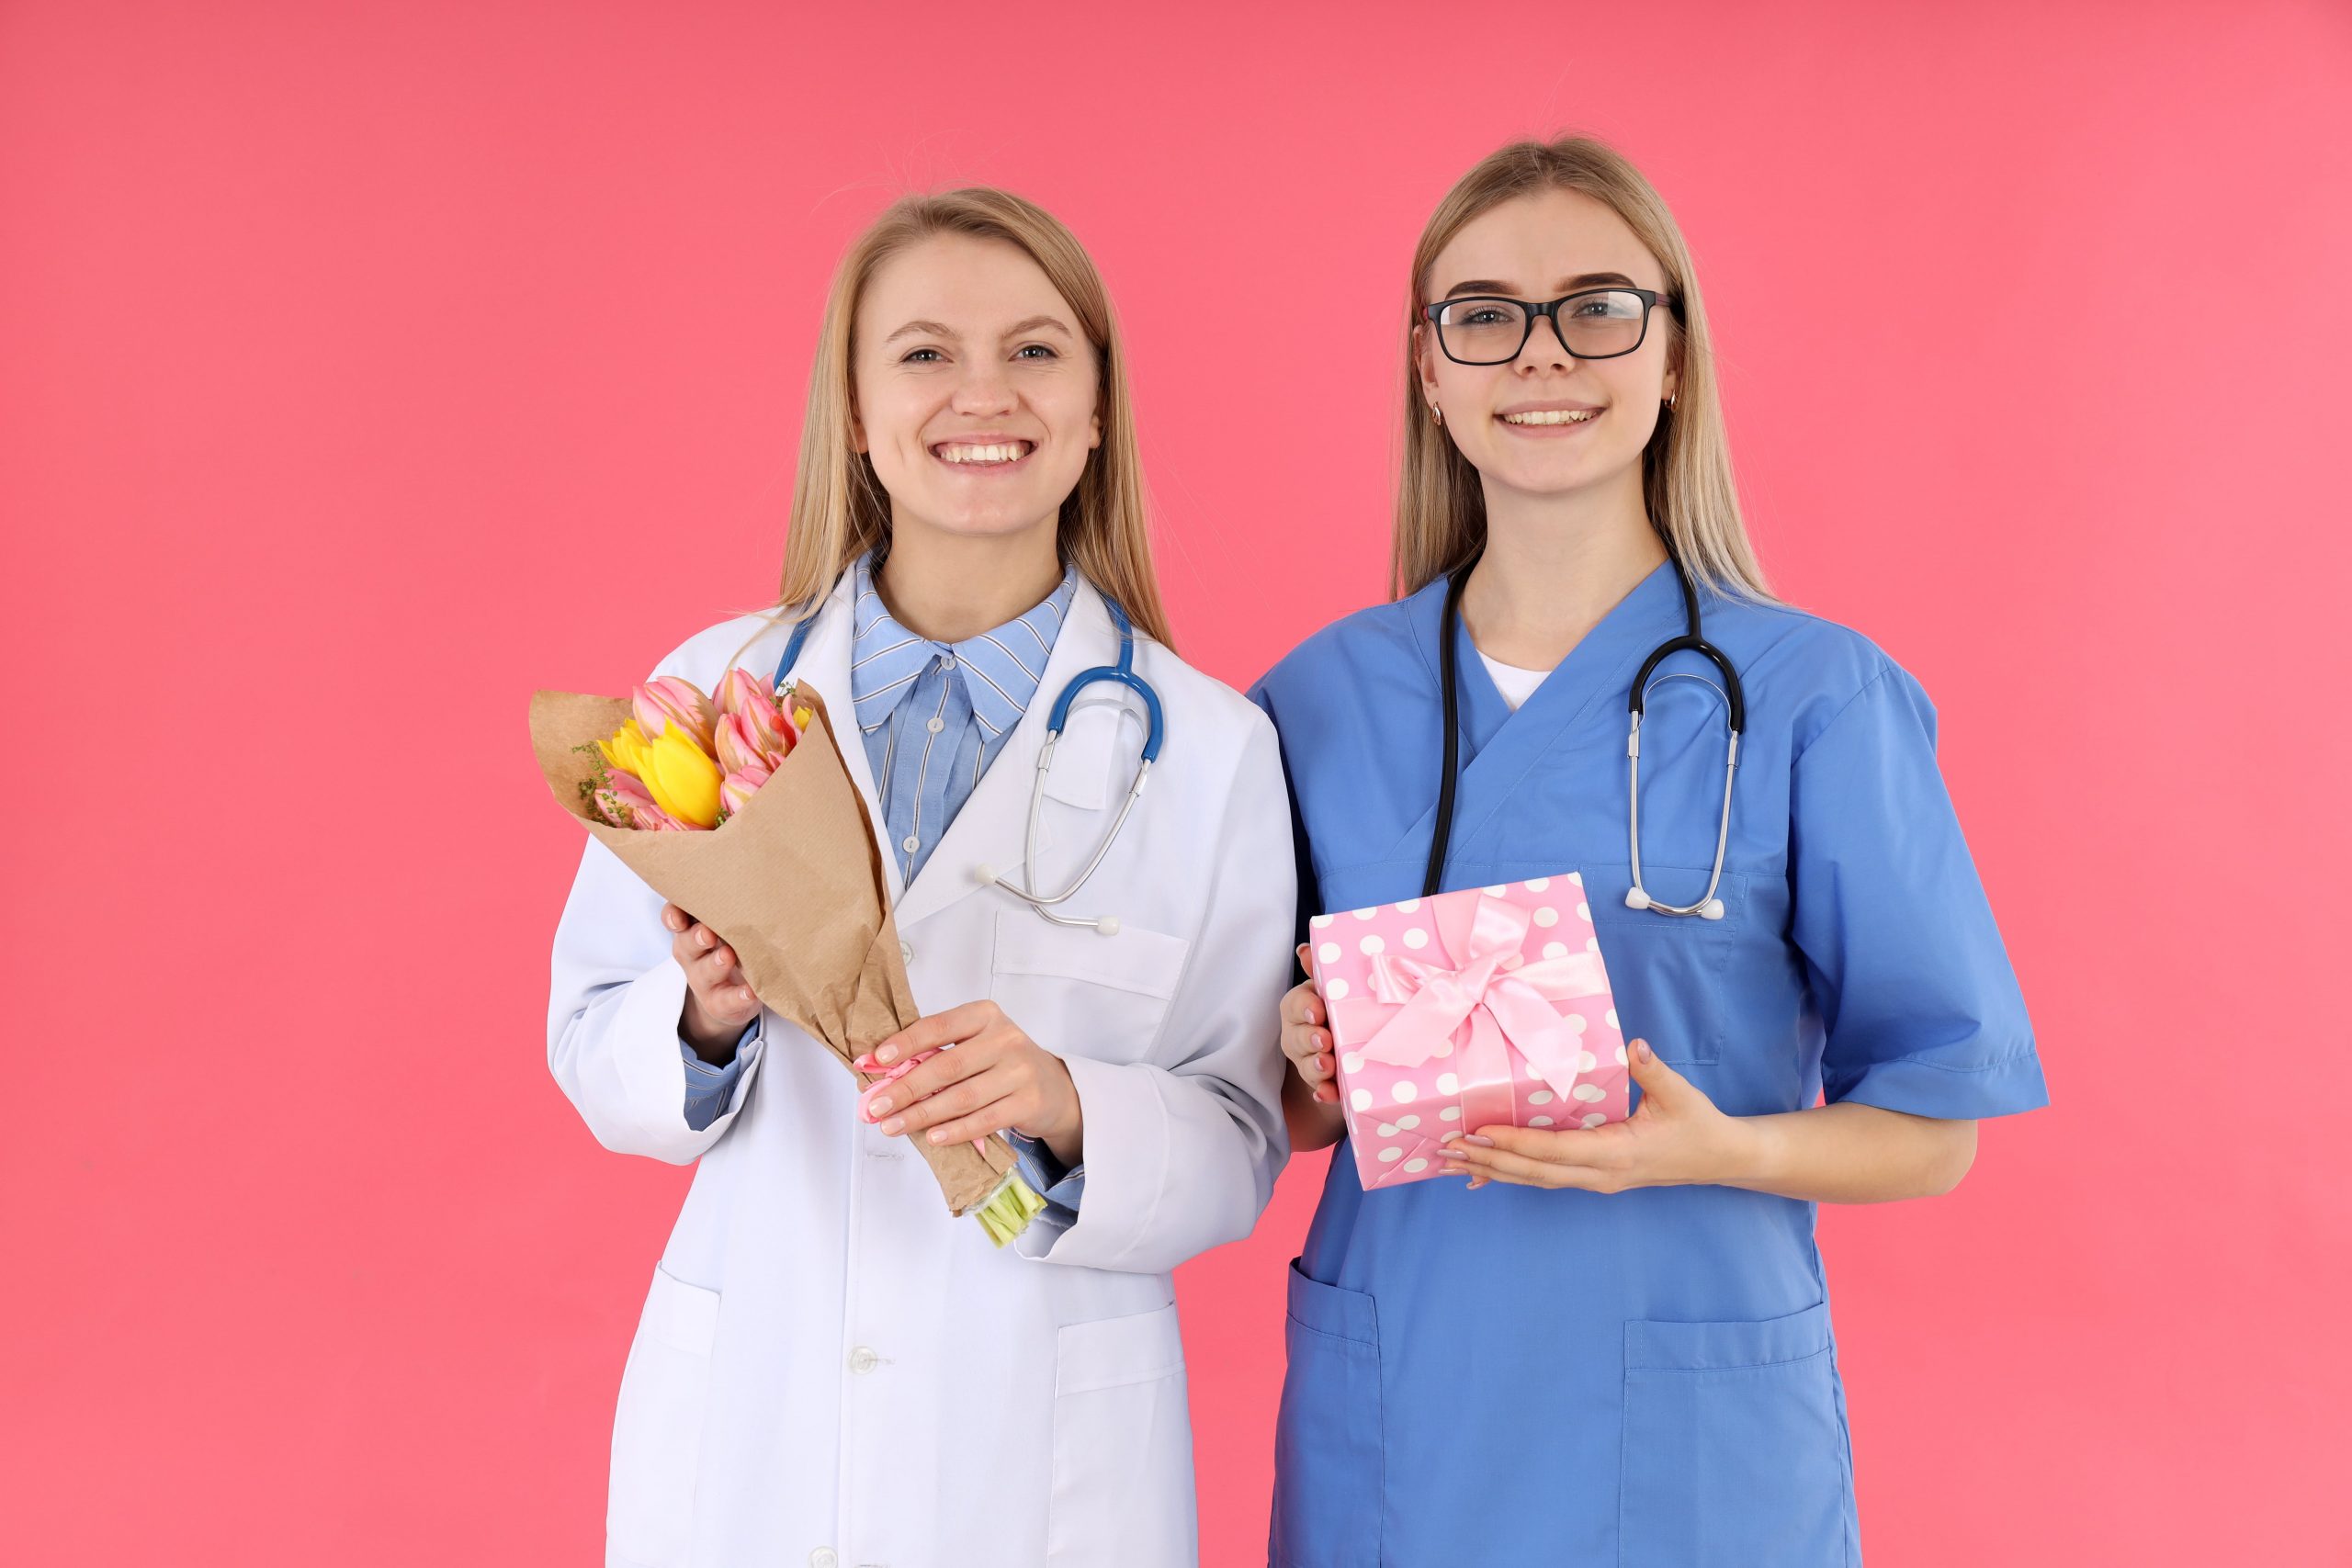 Best Gifts for a Nurse